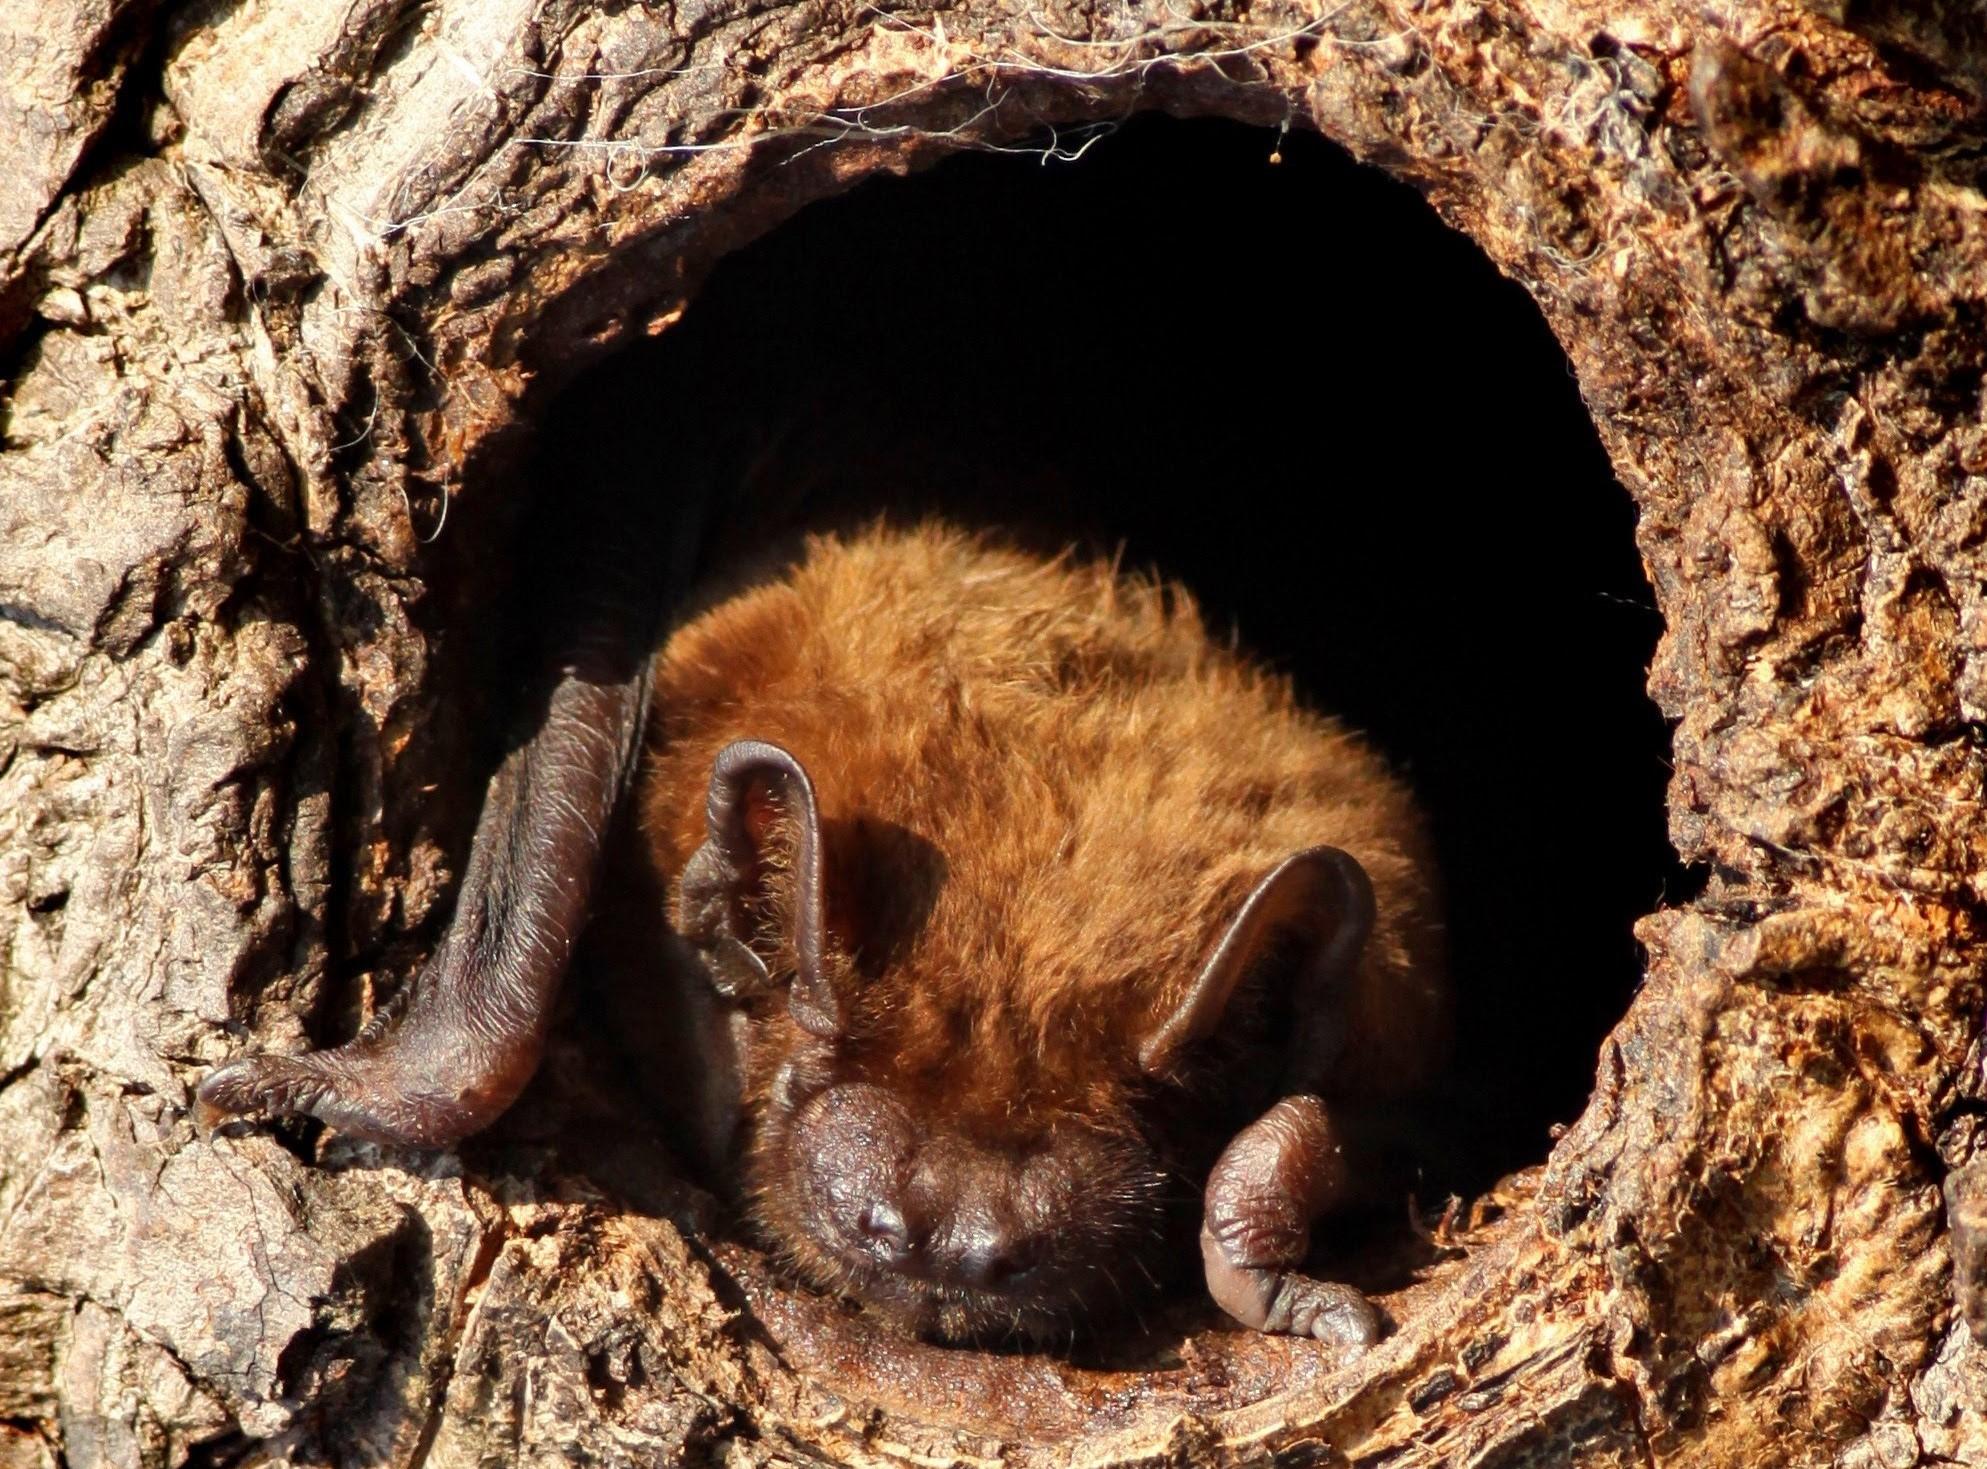 A Noctule bat nesting in the hole of a tree trunk